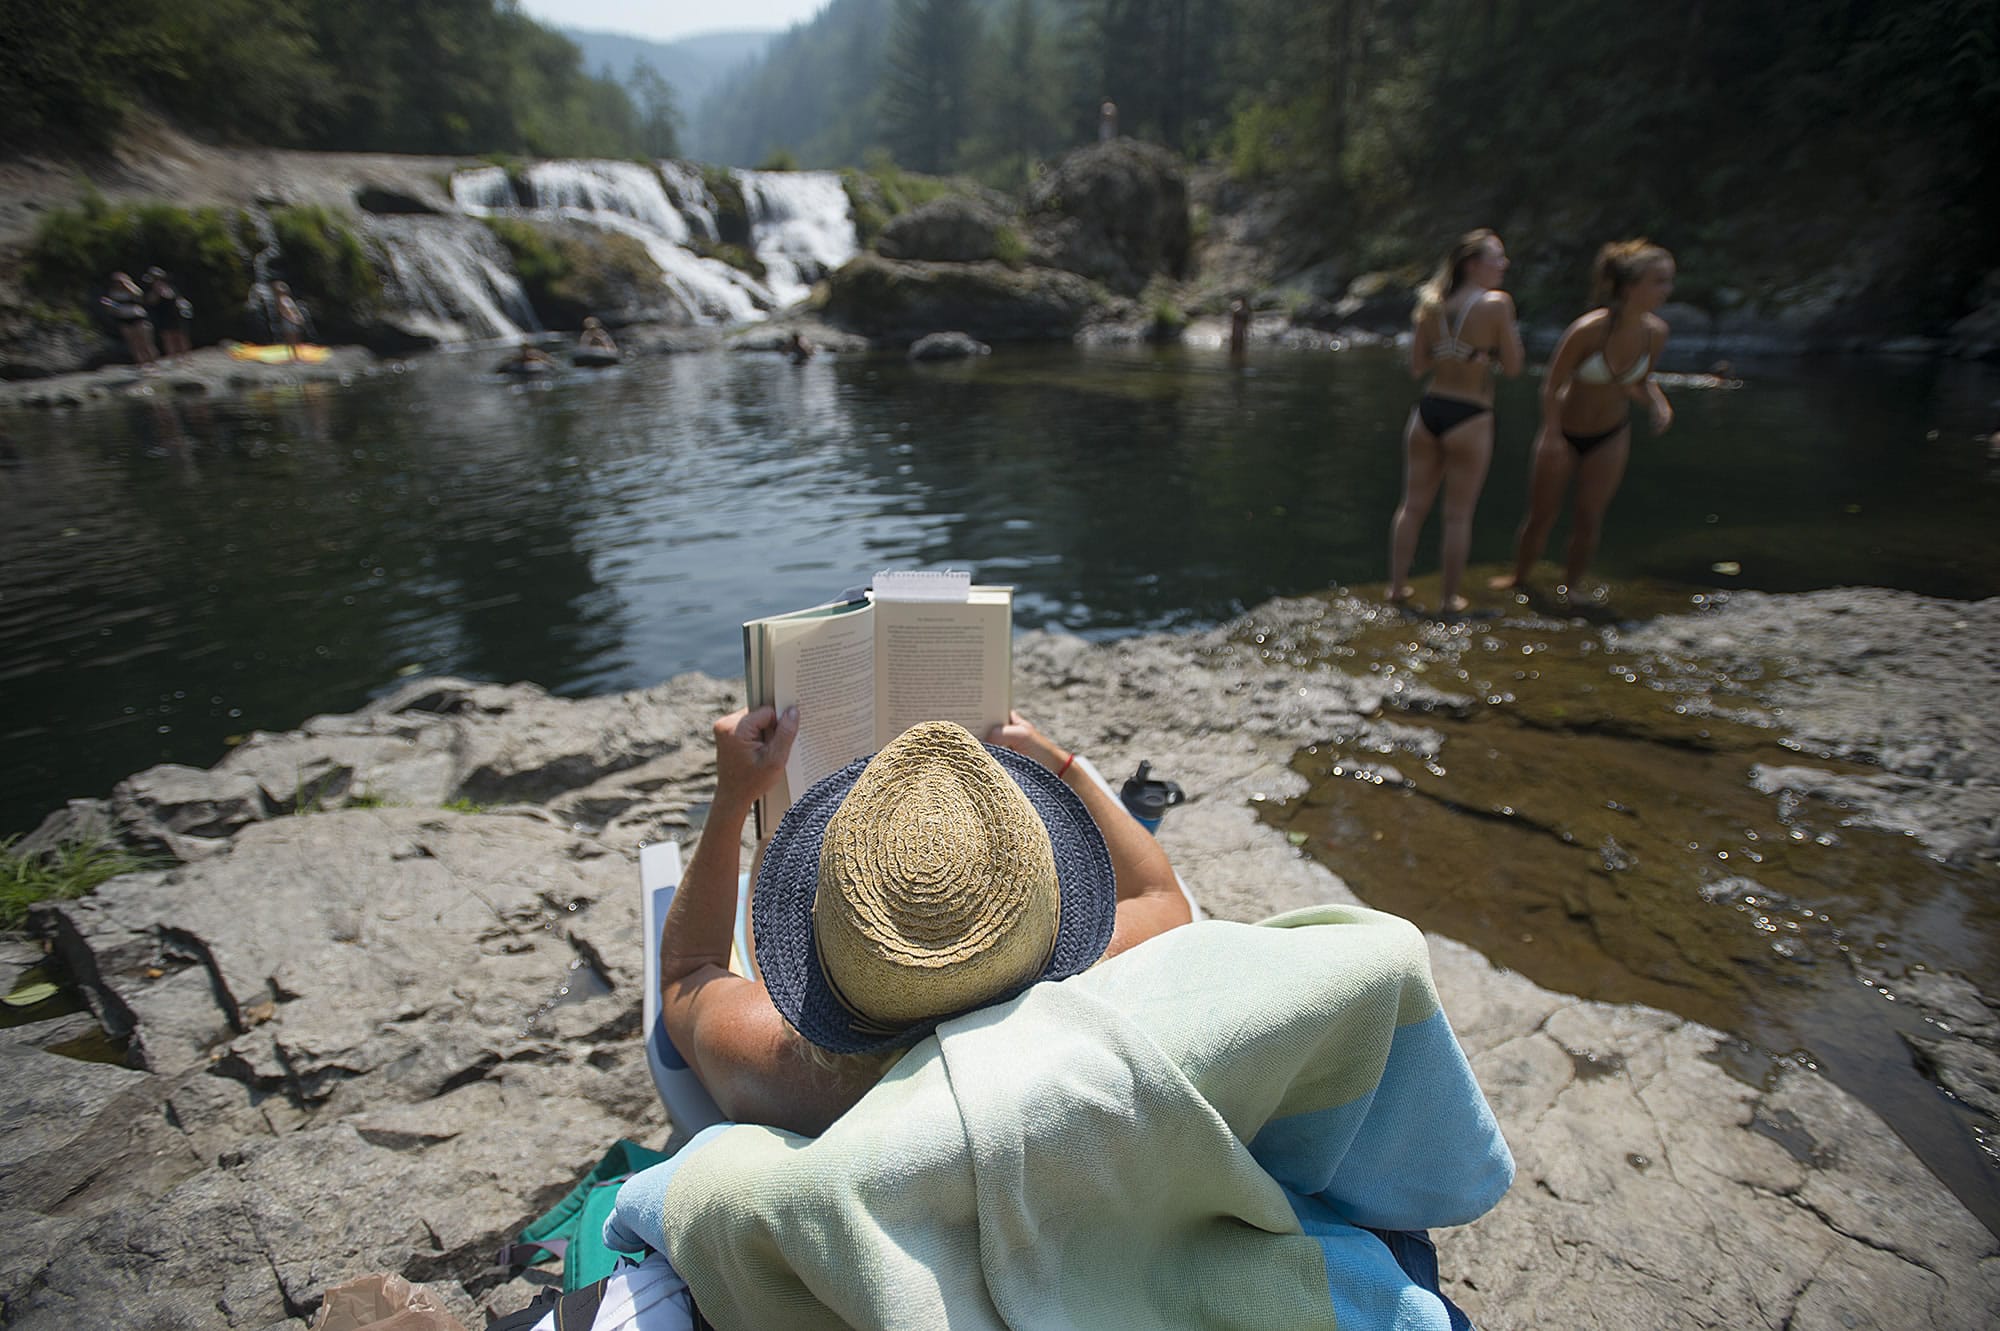 Jessica Magnusen of Tigard, center, relaxes with a good book and a scenic view with visiting Dougan Falls with her kids and friends Wednesday afternoon, Aug. 2, 2017.